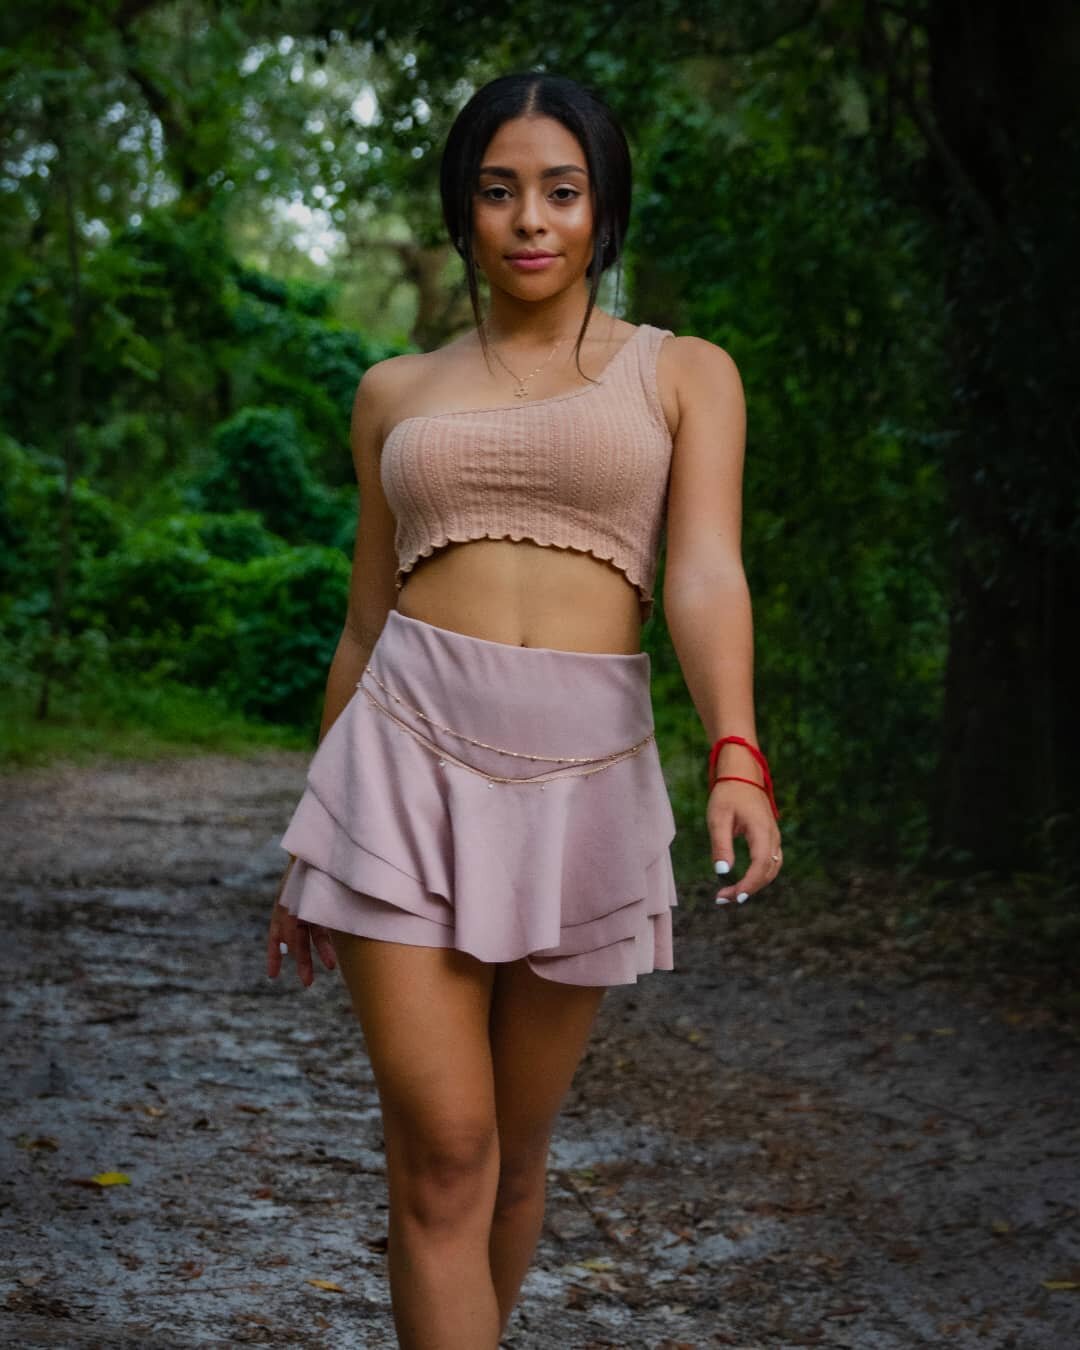 Take Everything in Stride.
.
.
.
#agameoftones #ftlauderdale #canon #visualmobs #treetopspark #naturephotography #gramslayers #model #modeling #photography #photooftheday #canon80d #canonphotography #weekly_feature#nature #portrait